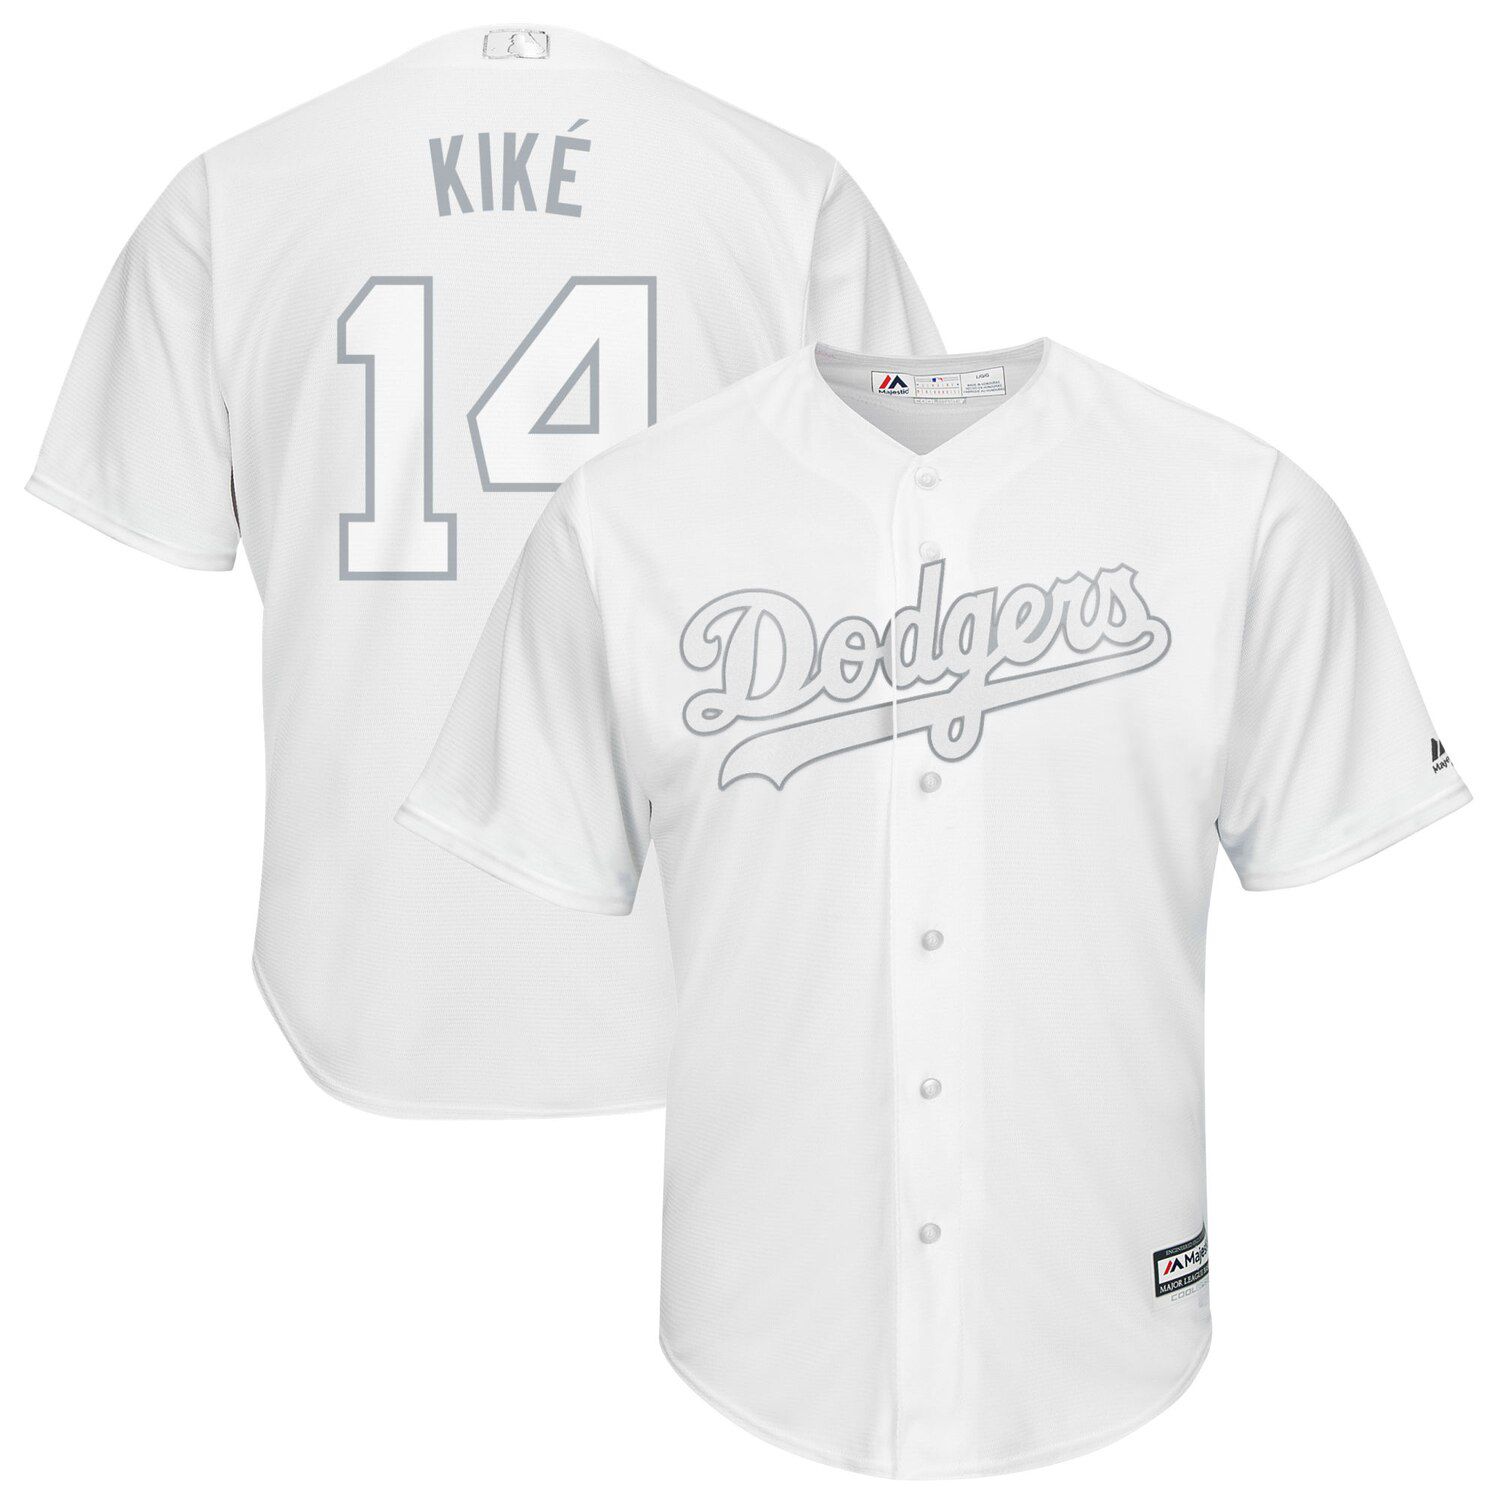 dodgers players weekend jersey